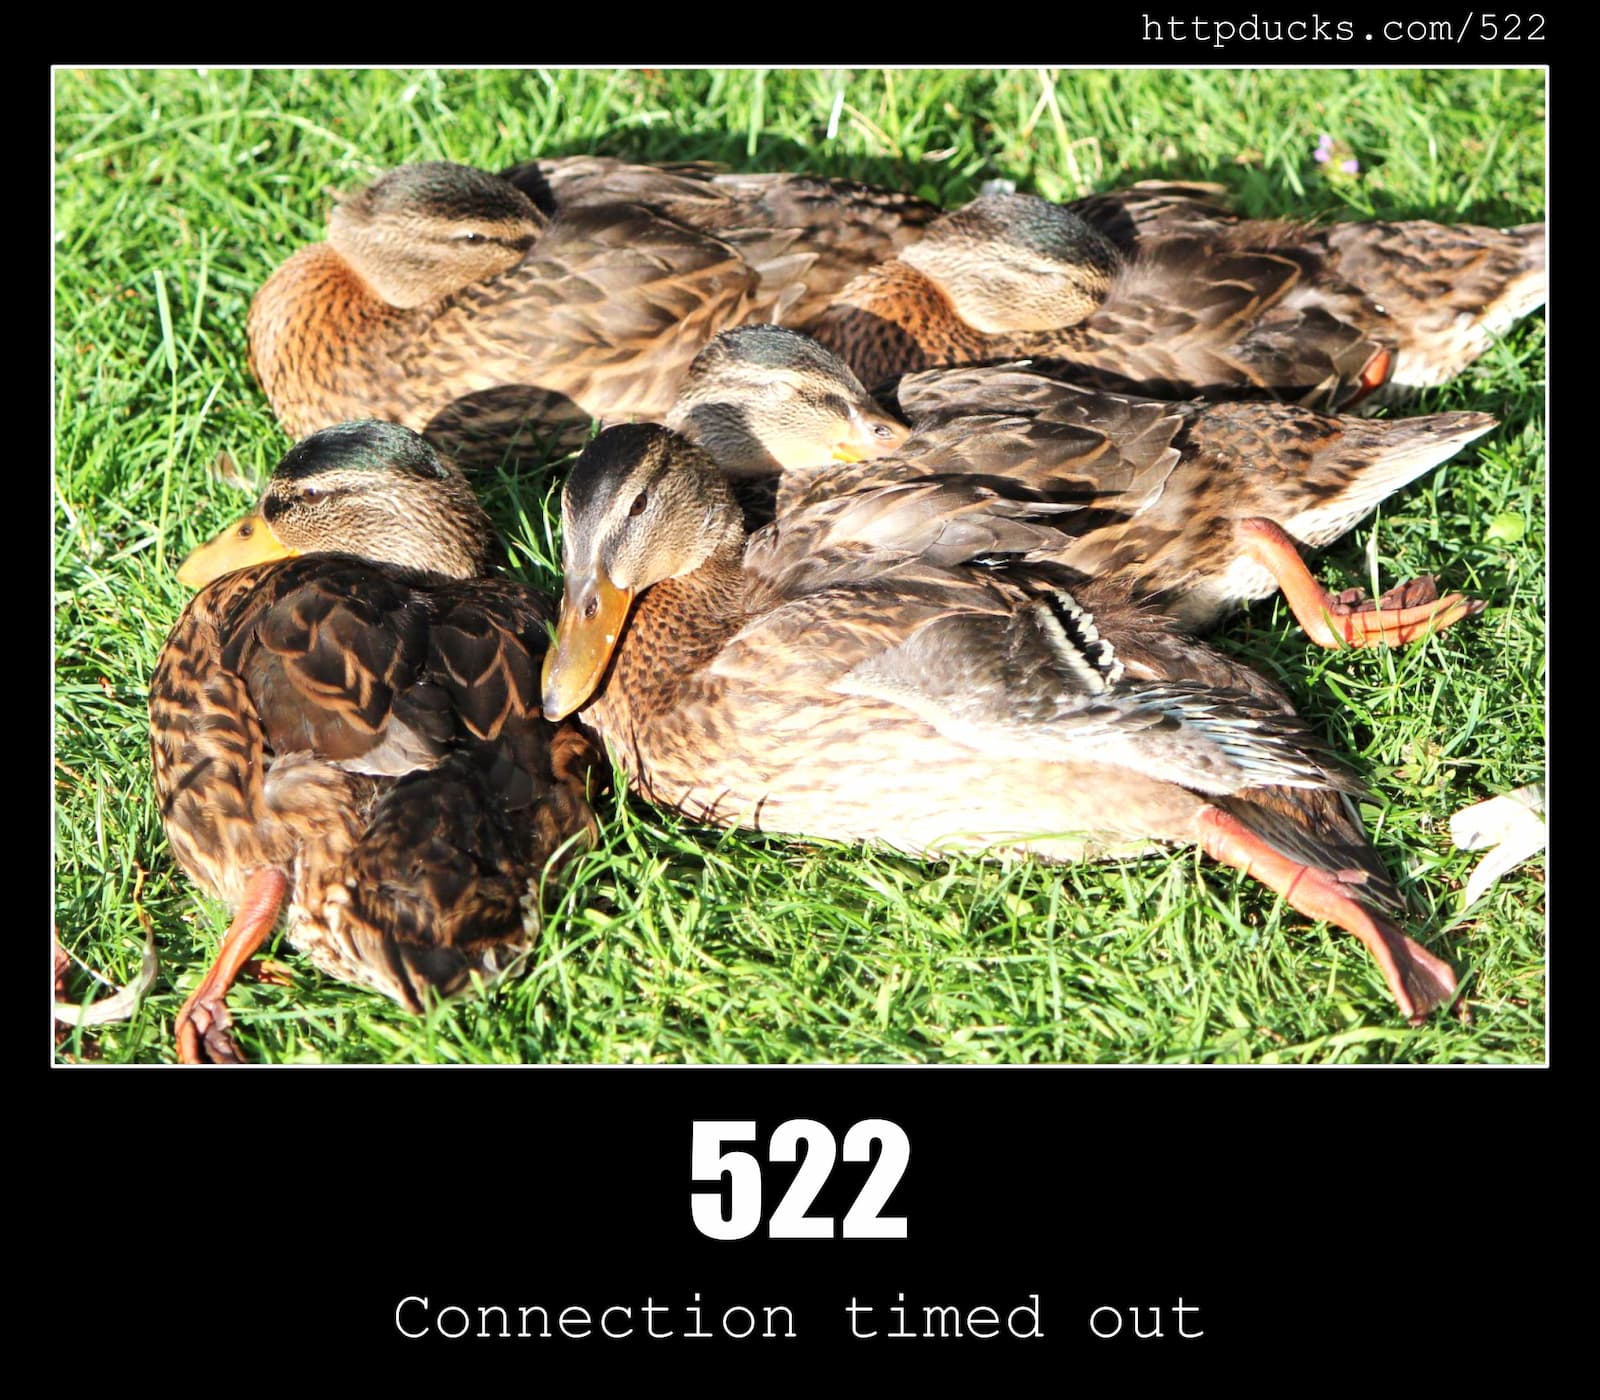 HTTP Status Code 522 Connection timed out & Ducks